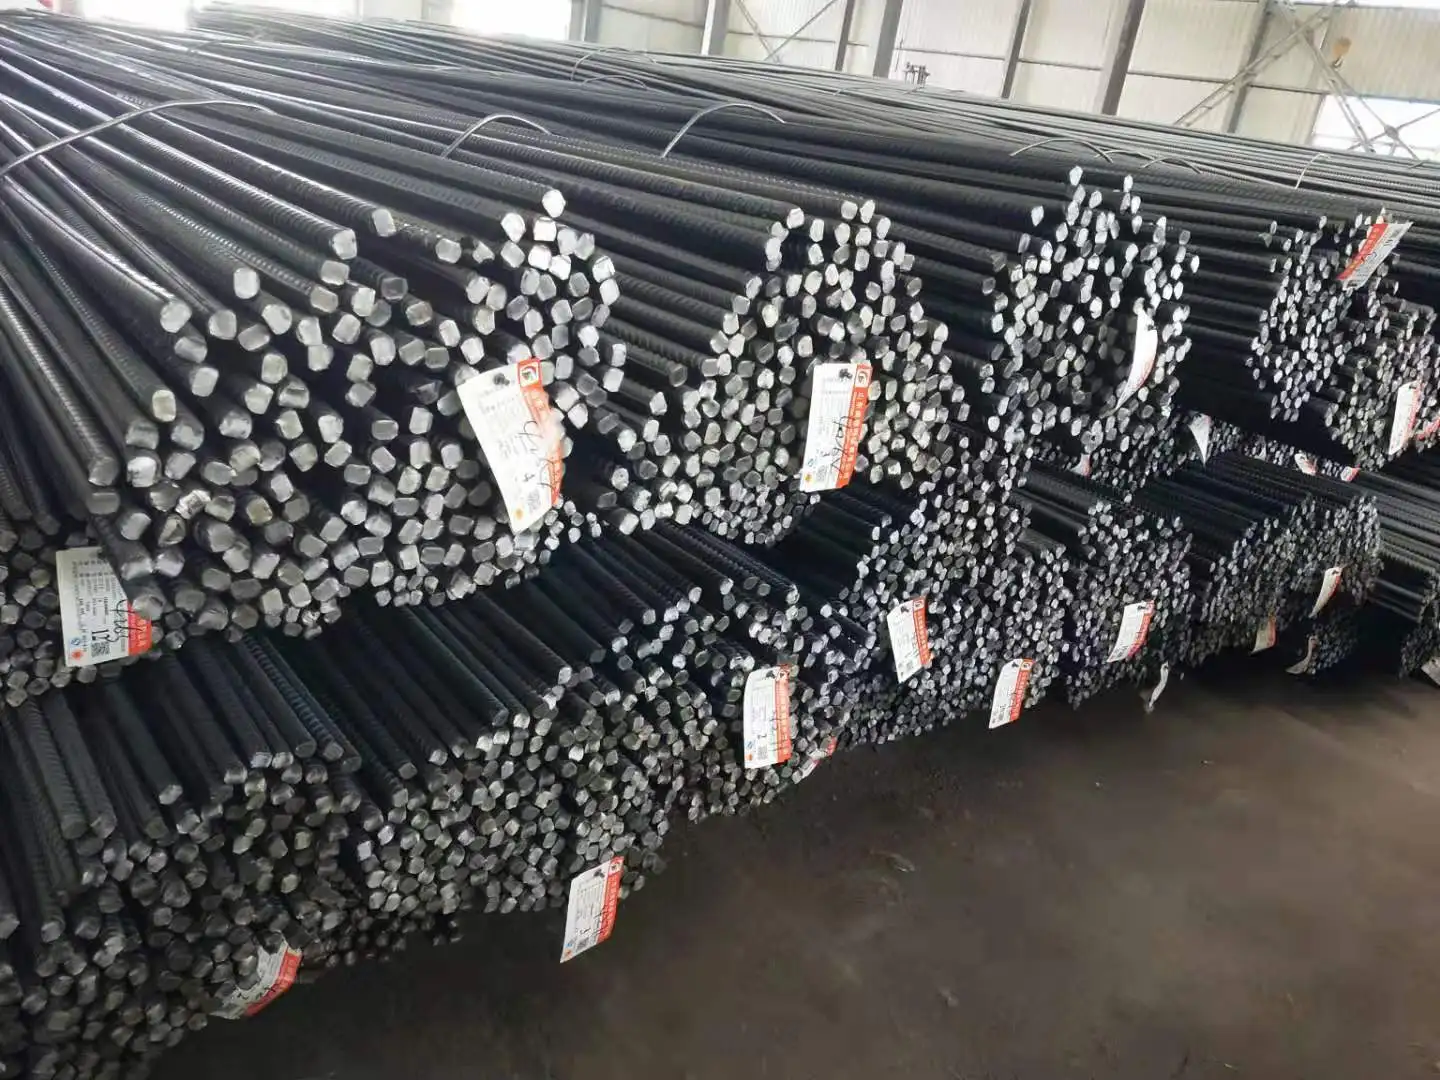 Made in China HRB400/HRB500 steel rebar wholesale price large inventory